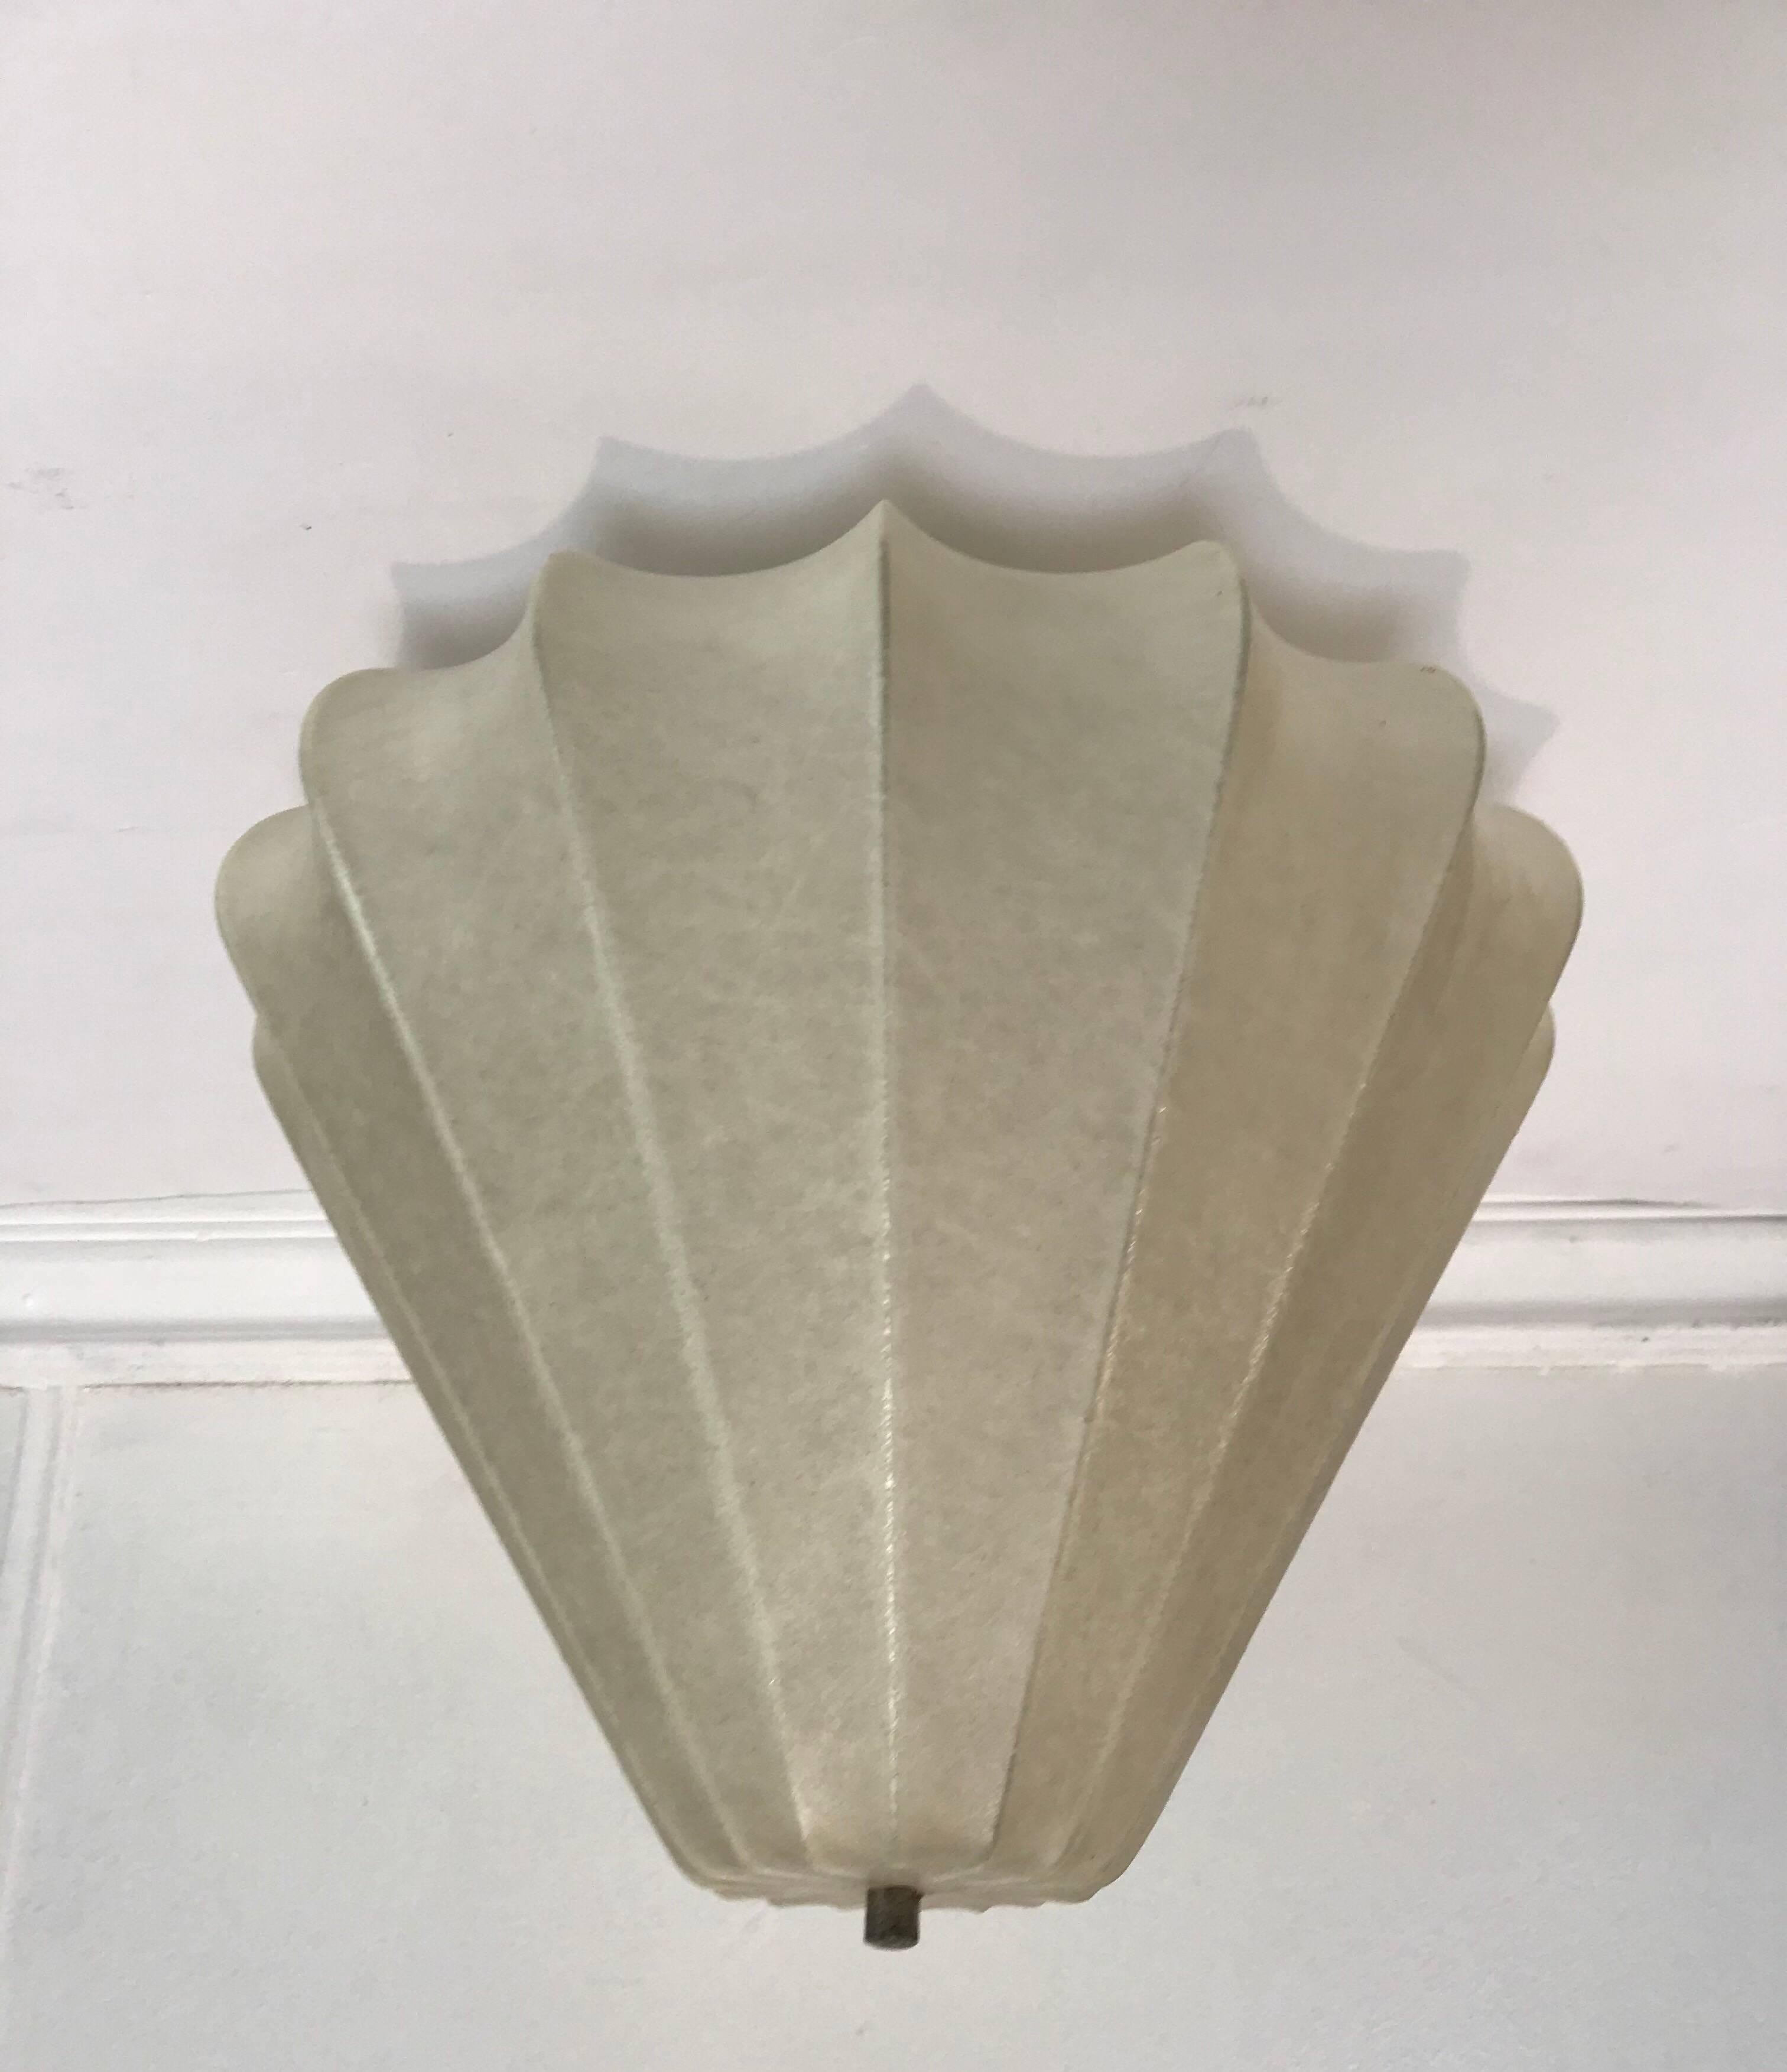 An Italian sculptural ceiling light designed by Achille Castiglioni for Flos in the 1960s. A spun resin shade with a brass fitting. It can be dropped on a ceiling pole of hung with a cord to be used as a pendant. Newly Rewired. Standard 120 watt